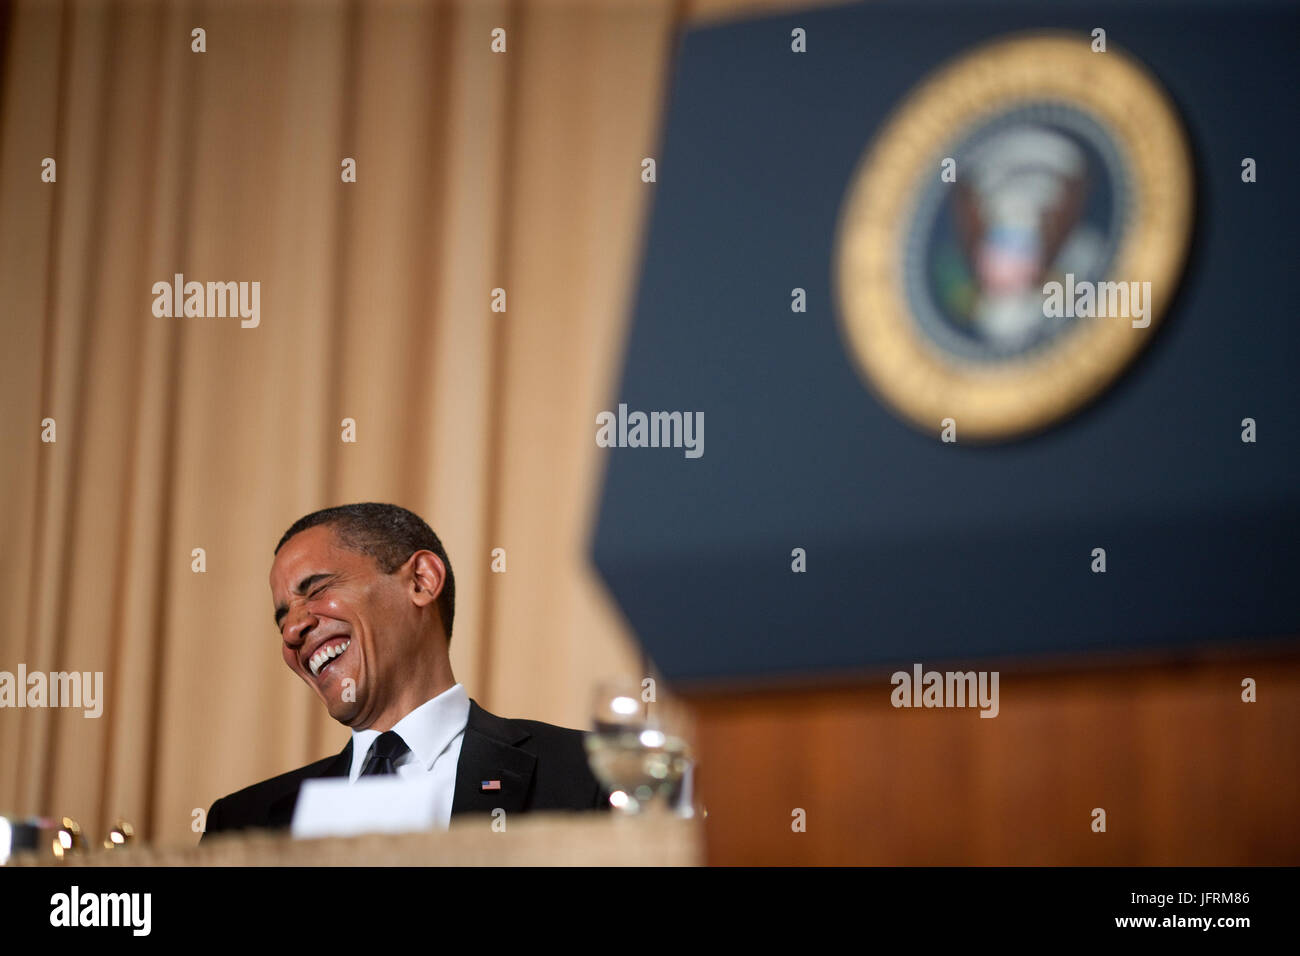 President Barack Obama reacts to a comment made at the White House Correspondents Awards Dinner in Washington, Saturday, May 9, 2009. Official White House Photo by Lawrence Jackson.  This official White House photograph is being made available for publication by news organizations and/or for personal use printing by the subject(s) of the photograph. The photograph may not be manipulated or used in materials, advertisements, products, or promotions that in any way suggest approval or endorsement of the President, the First Family, or the White House. Stock Photo